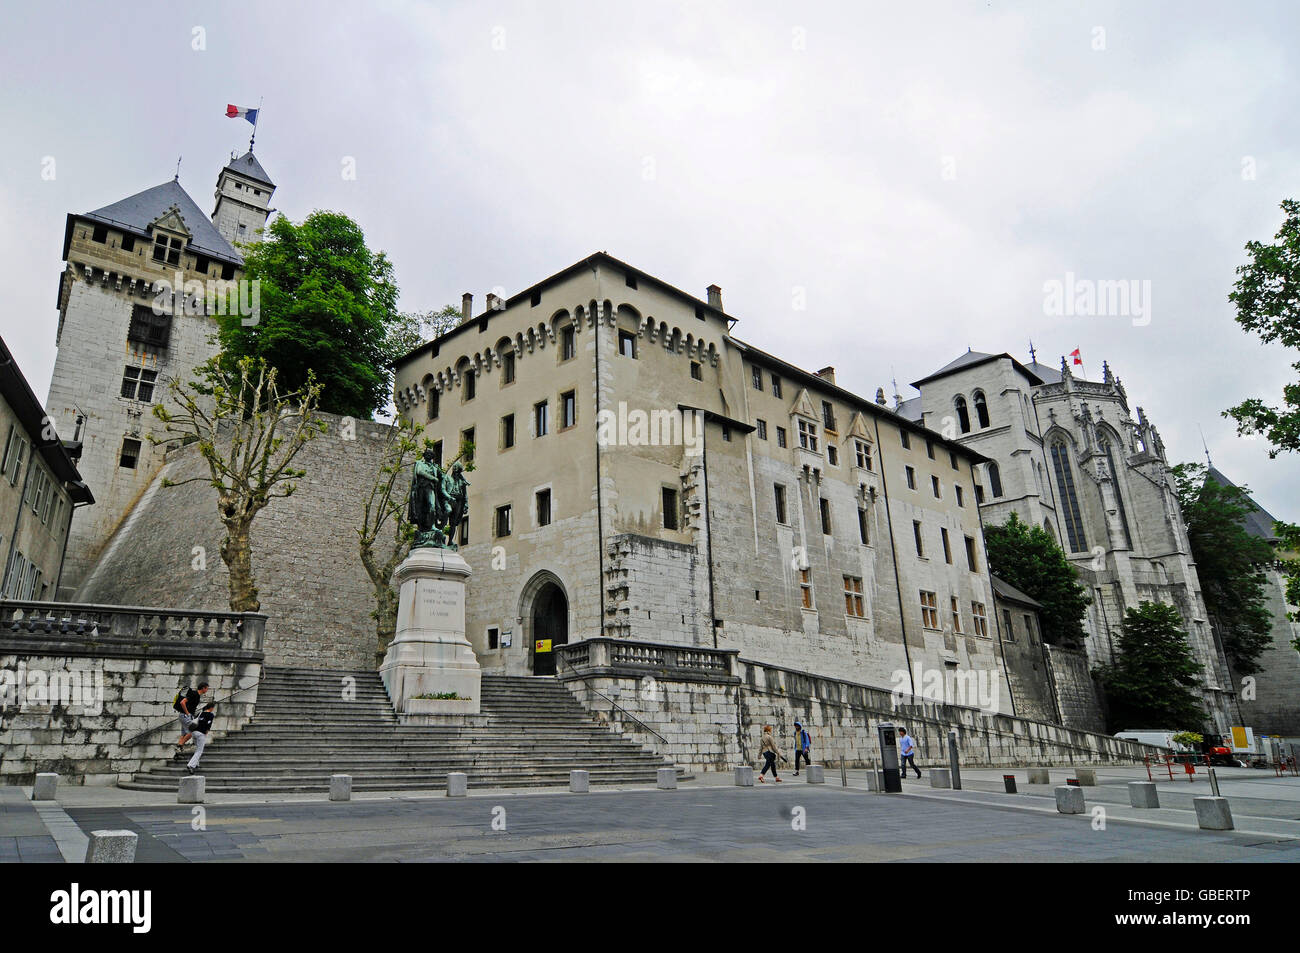 Memorial of Joseph and Xavier de Maistre, Chambery Castle, former Chateau of the Dukes of Savoi, Chambery, Rhone-Alpes, France / Chateau Chambery Stock Photo